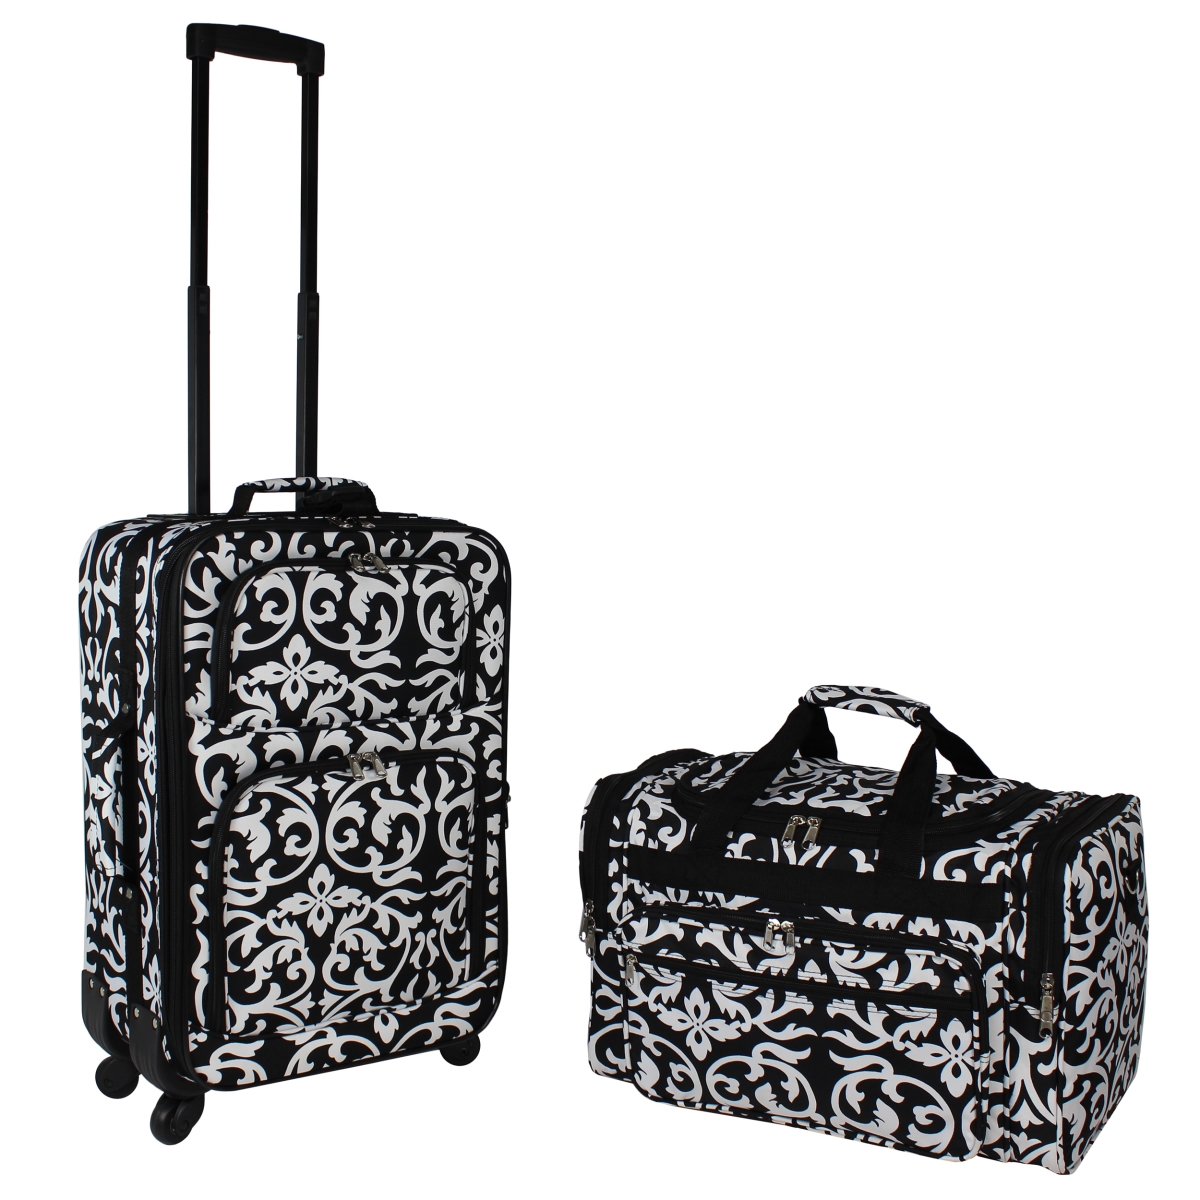 Wt8701-2-501 Carry On Expandable Spinner Luggage Set - Black Trim Damask, 2 Piece